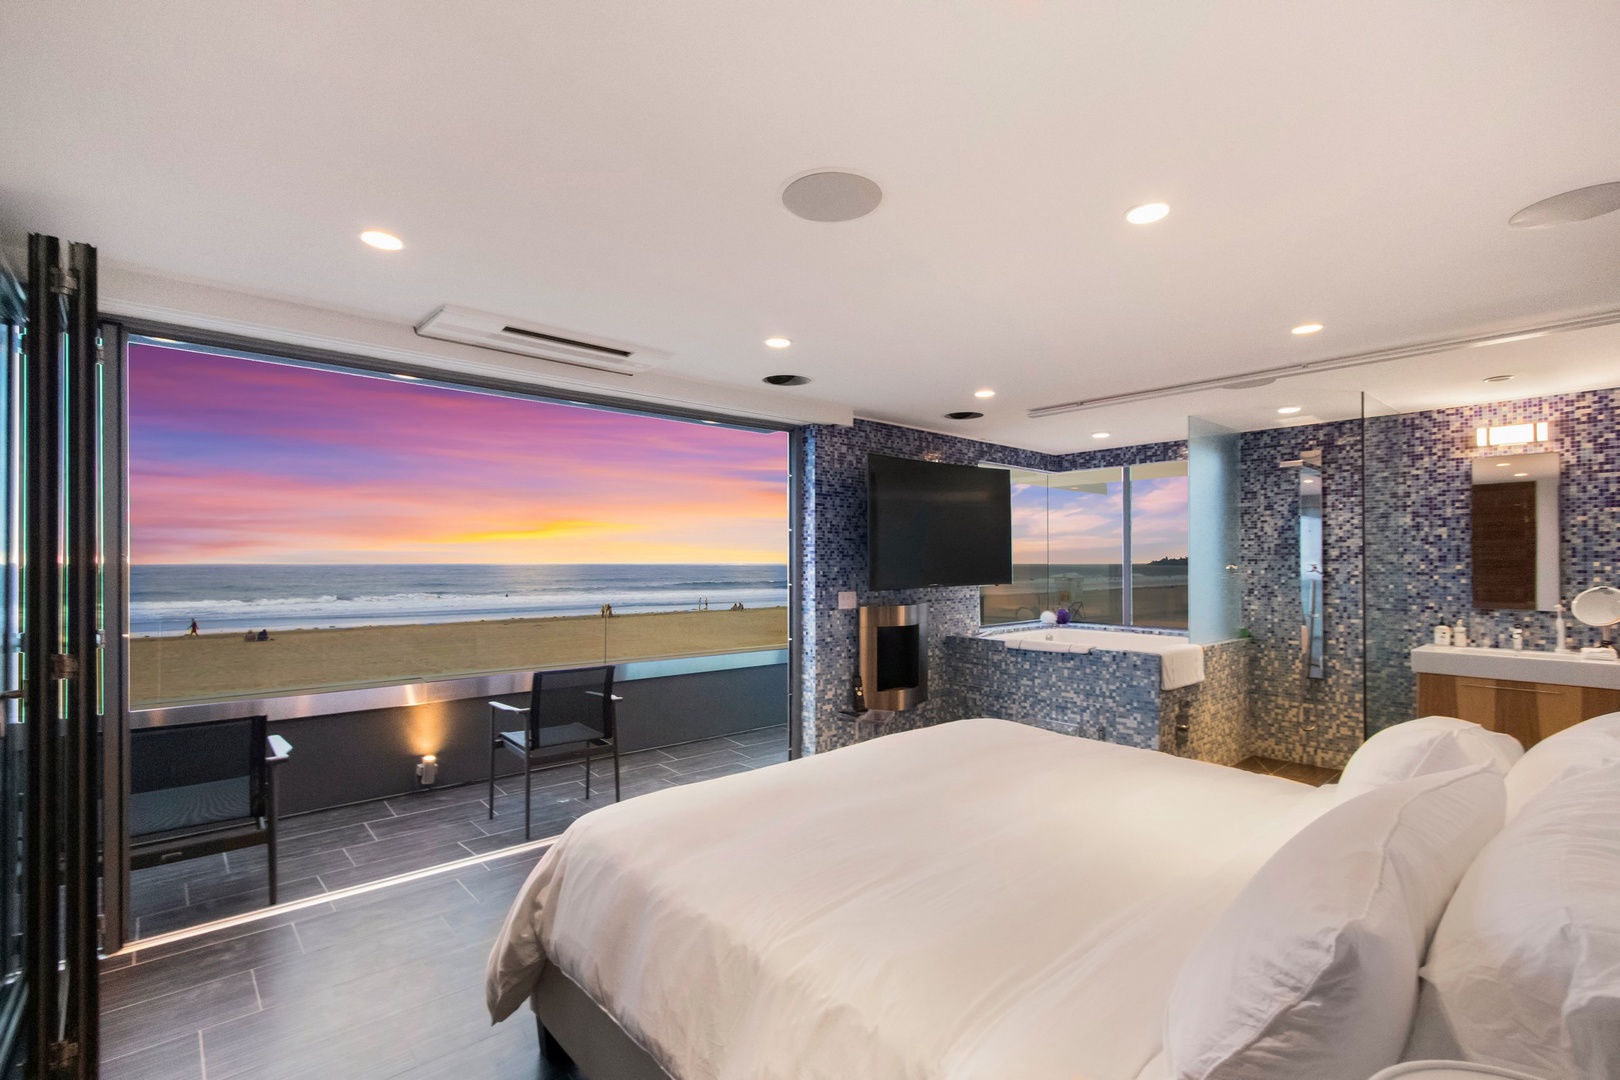 Bedroom and balcony sunset views